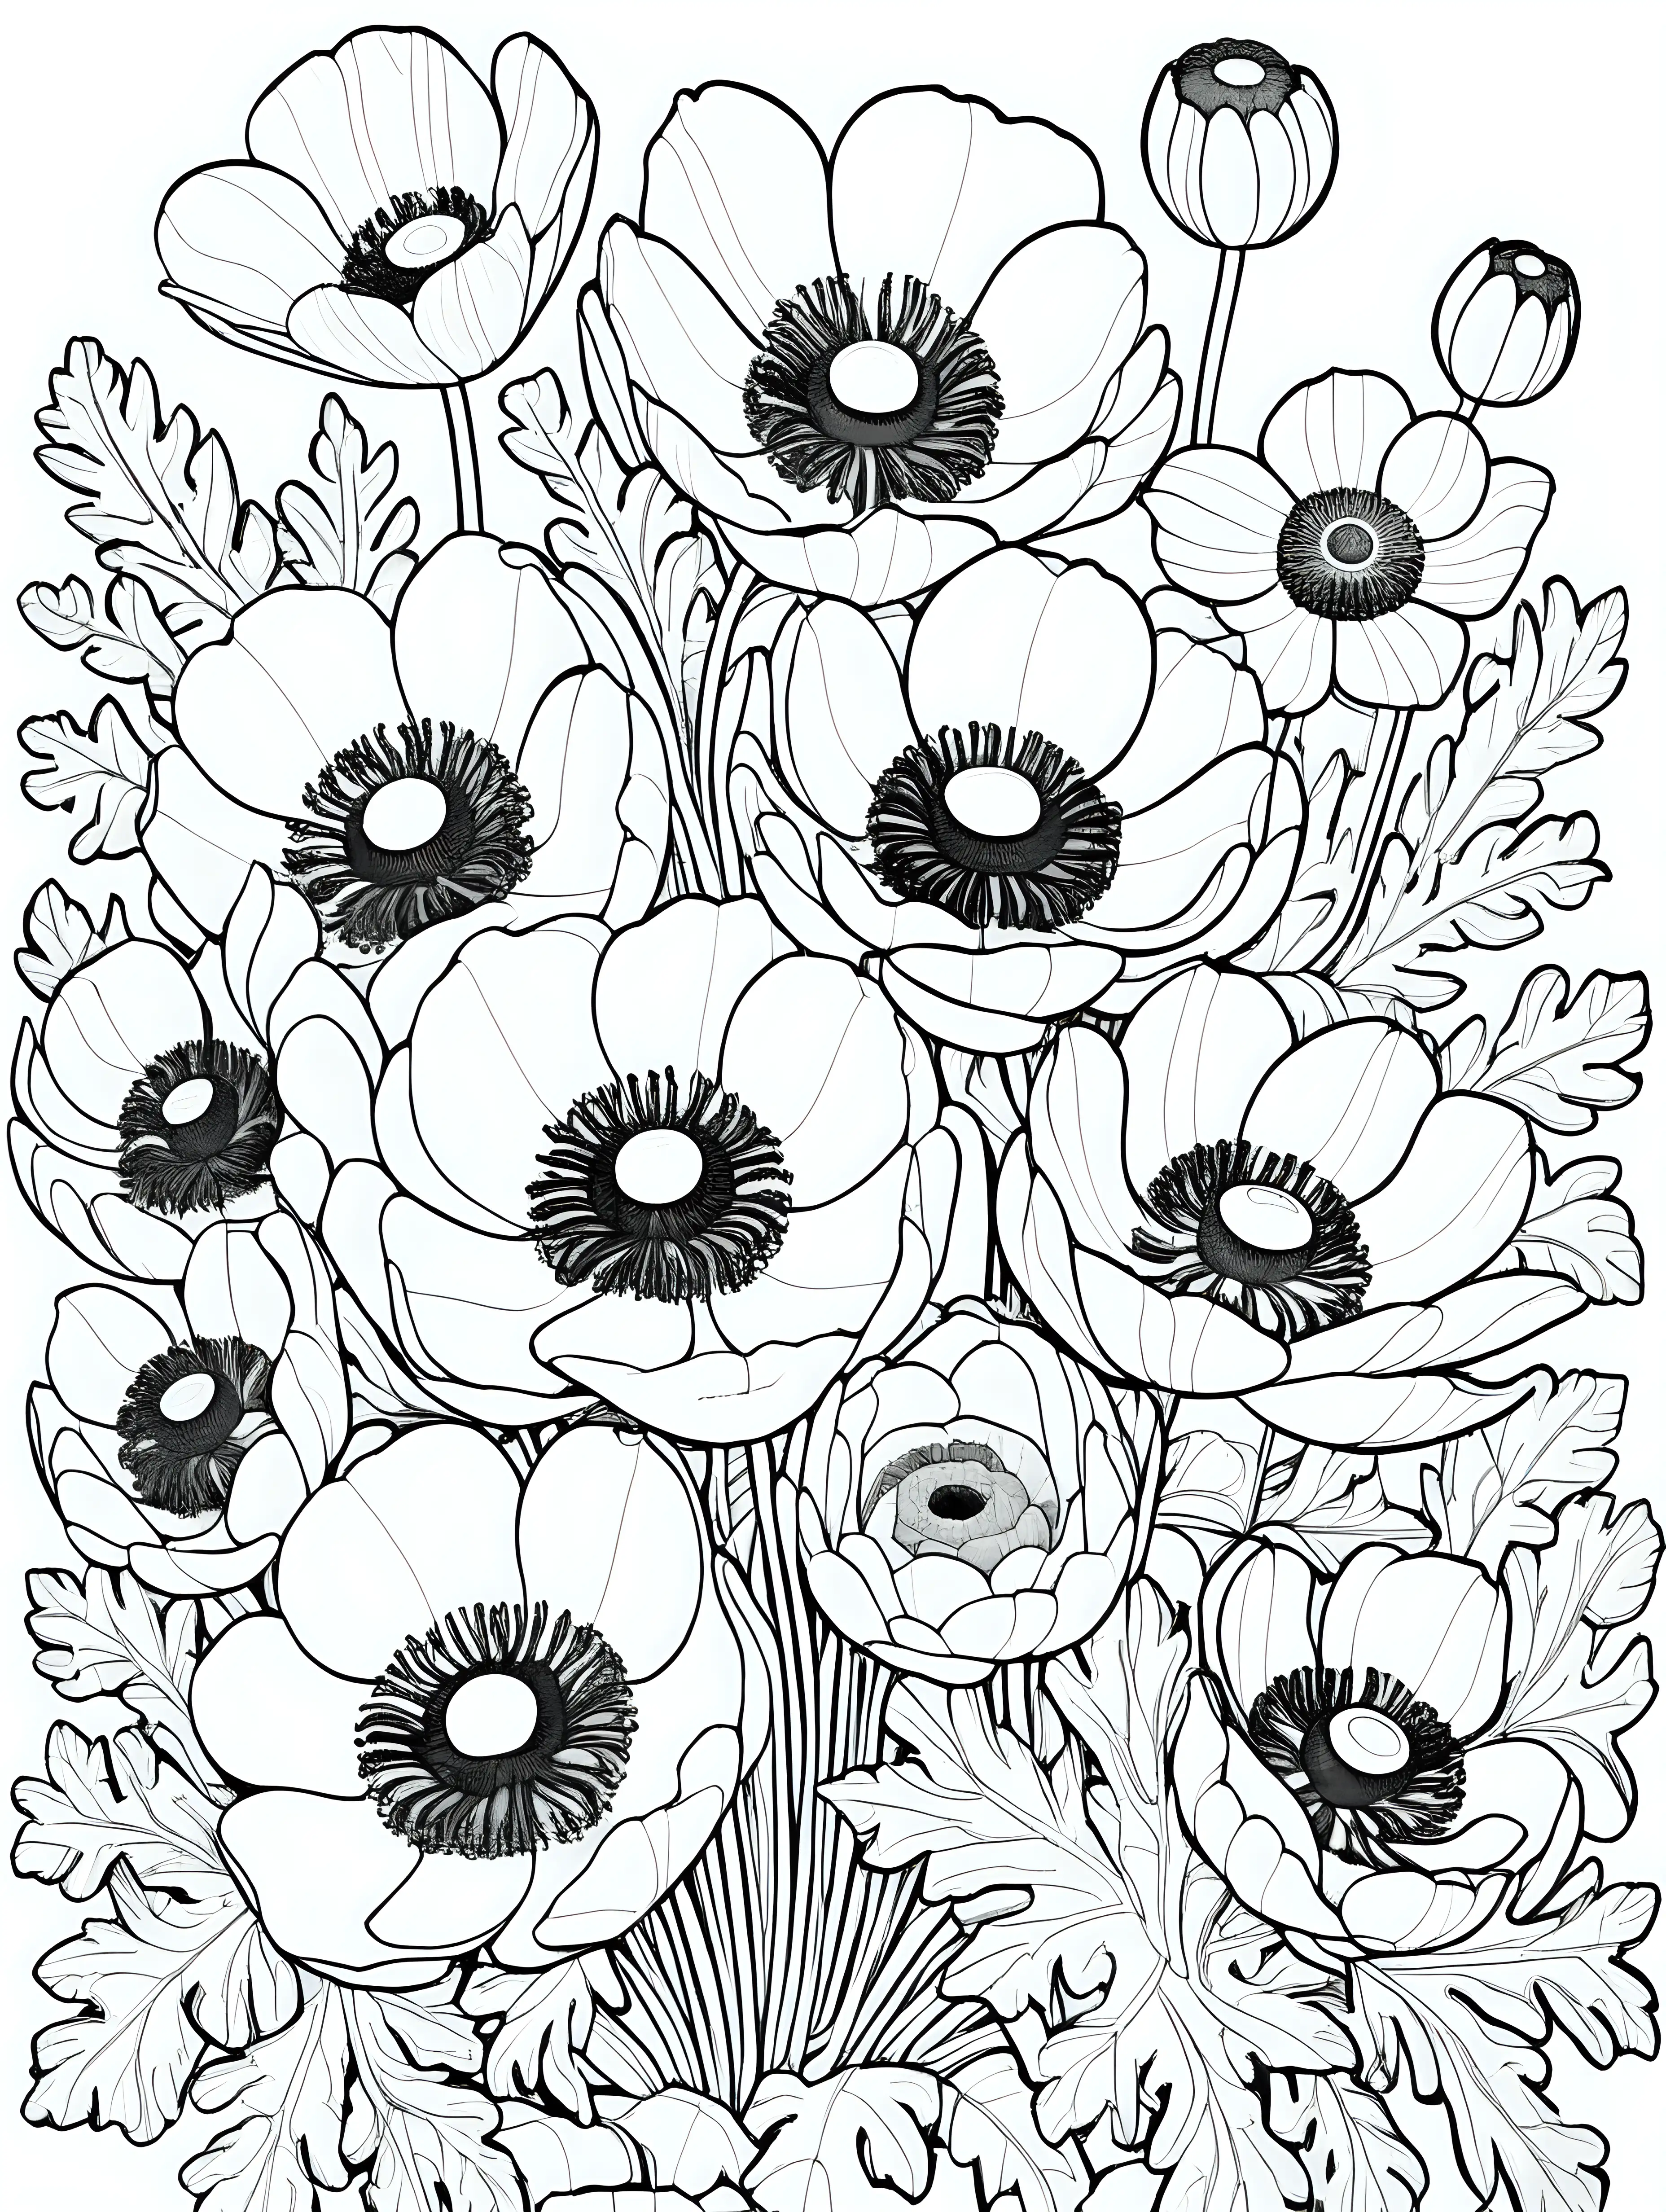 A arrangement of large anemone flowers filling the entire page black and white coloring page, cartoon style, thin lines, few details, no background, no shadows, no greys